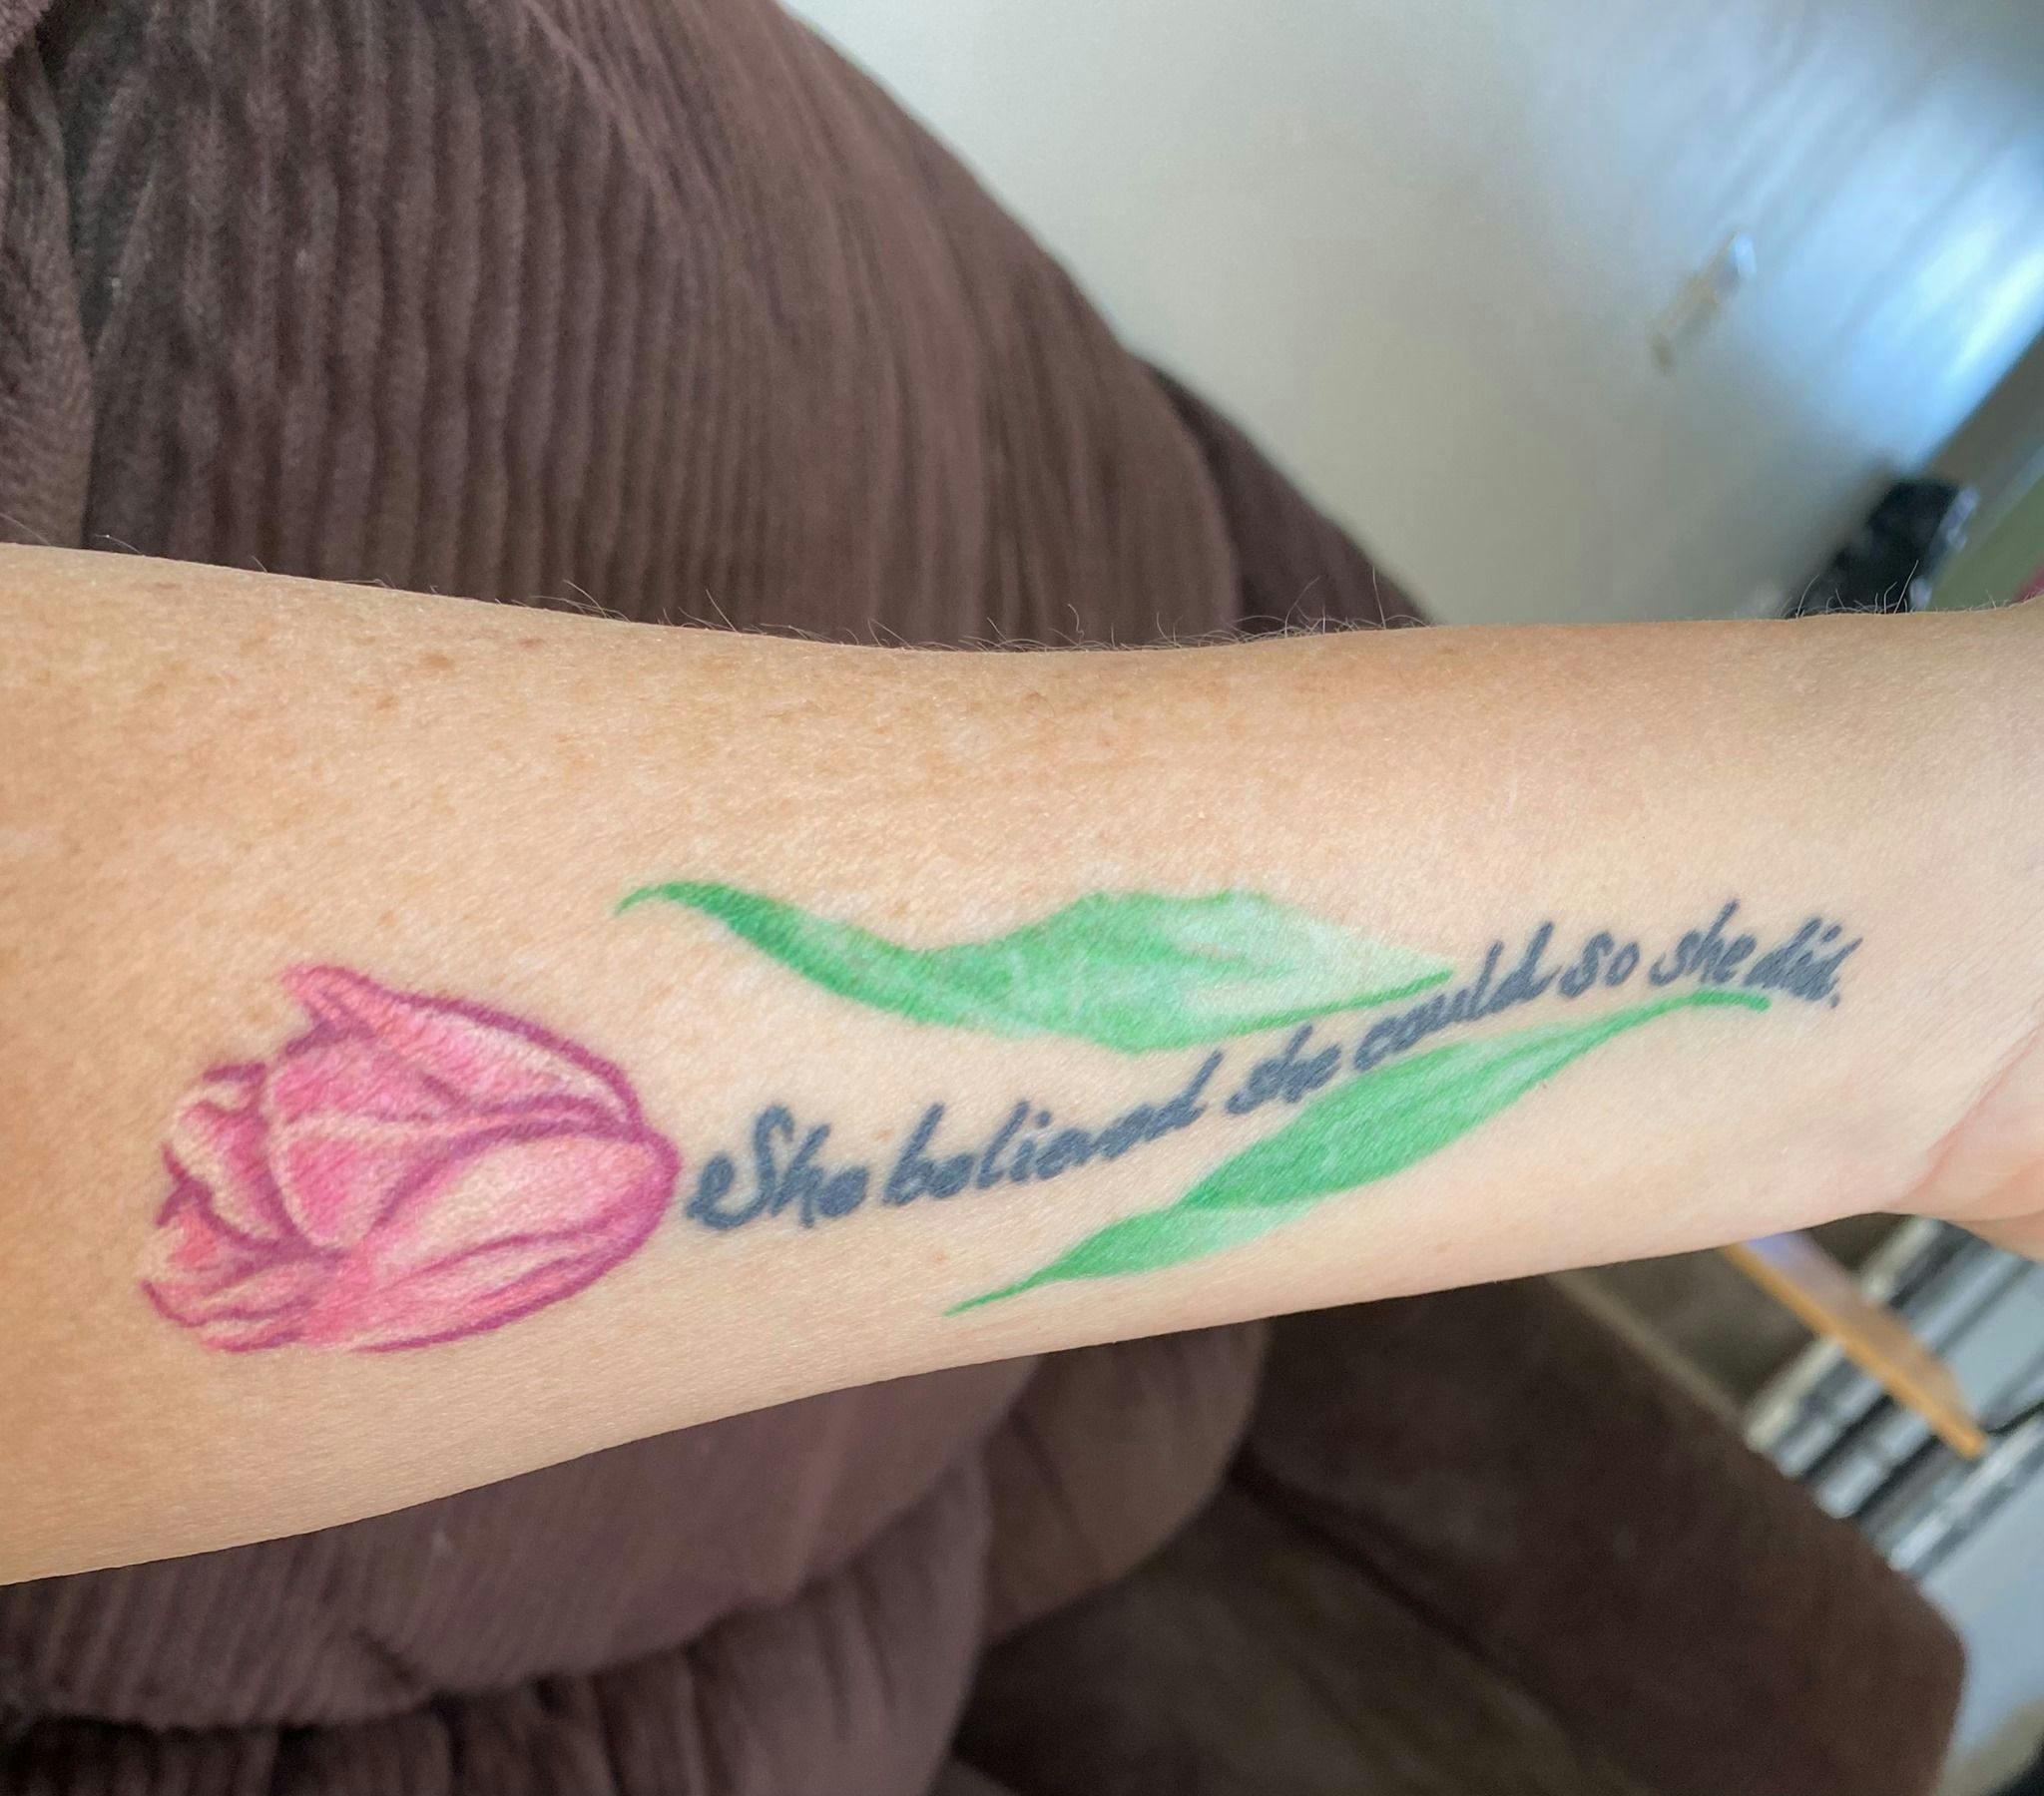 Author Debbie Legault's tattoo to commemorate the end of her daughter's cancer treatments.